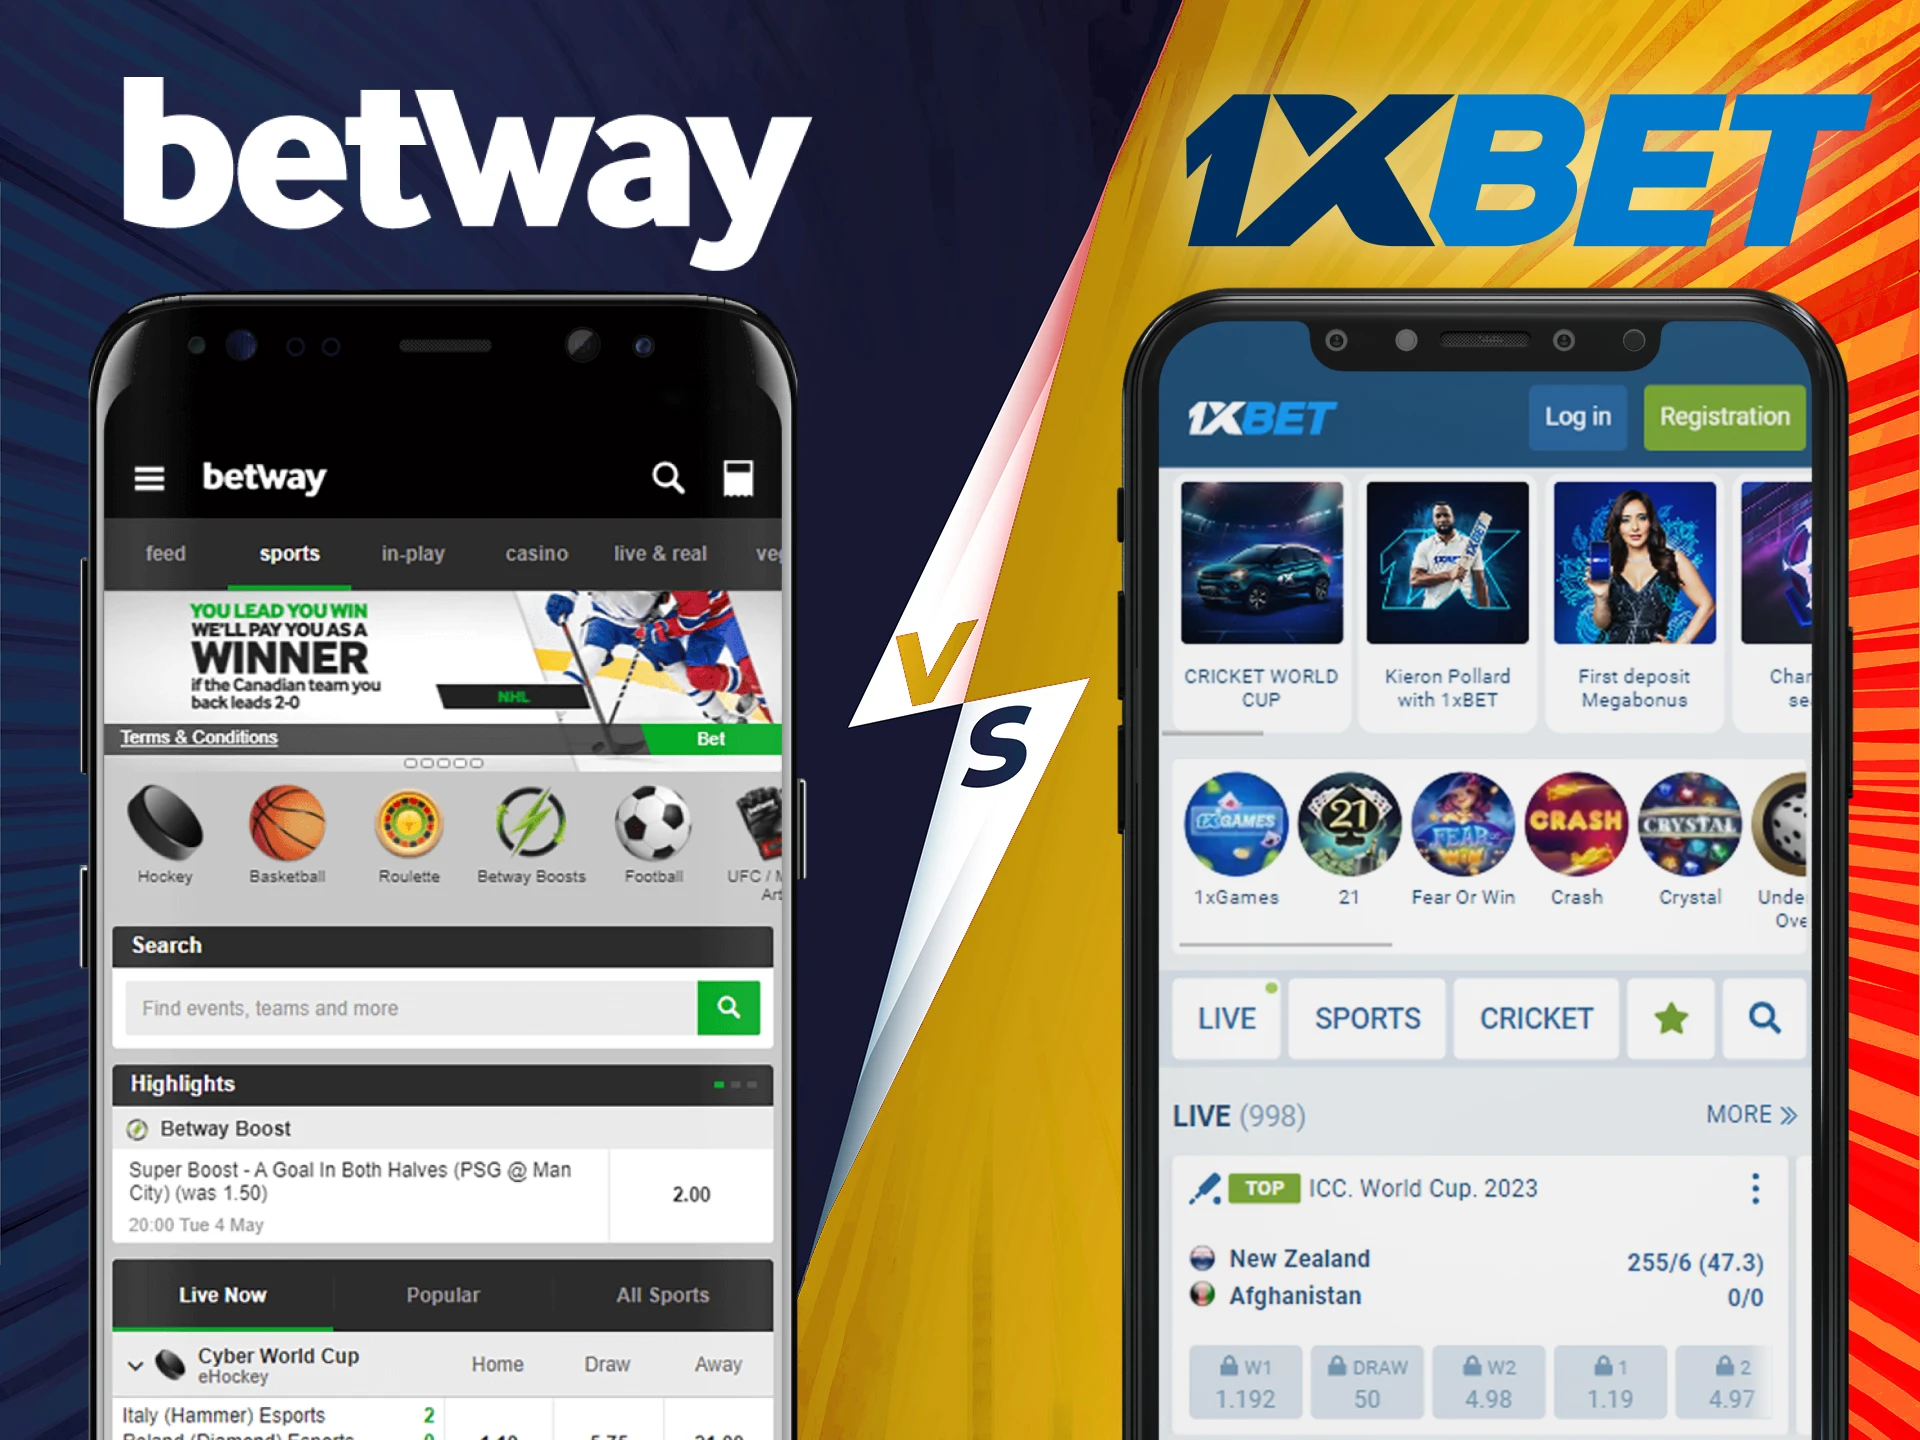 Compare Betway and 1xbet apps and choose the best one for you.